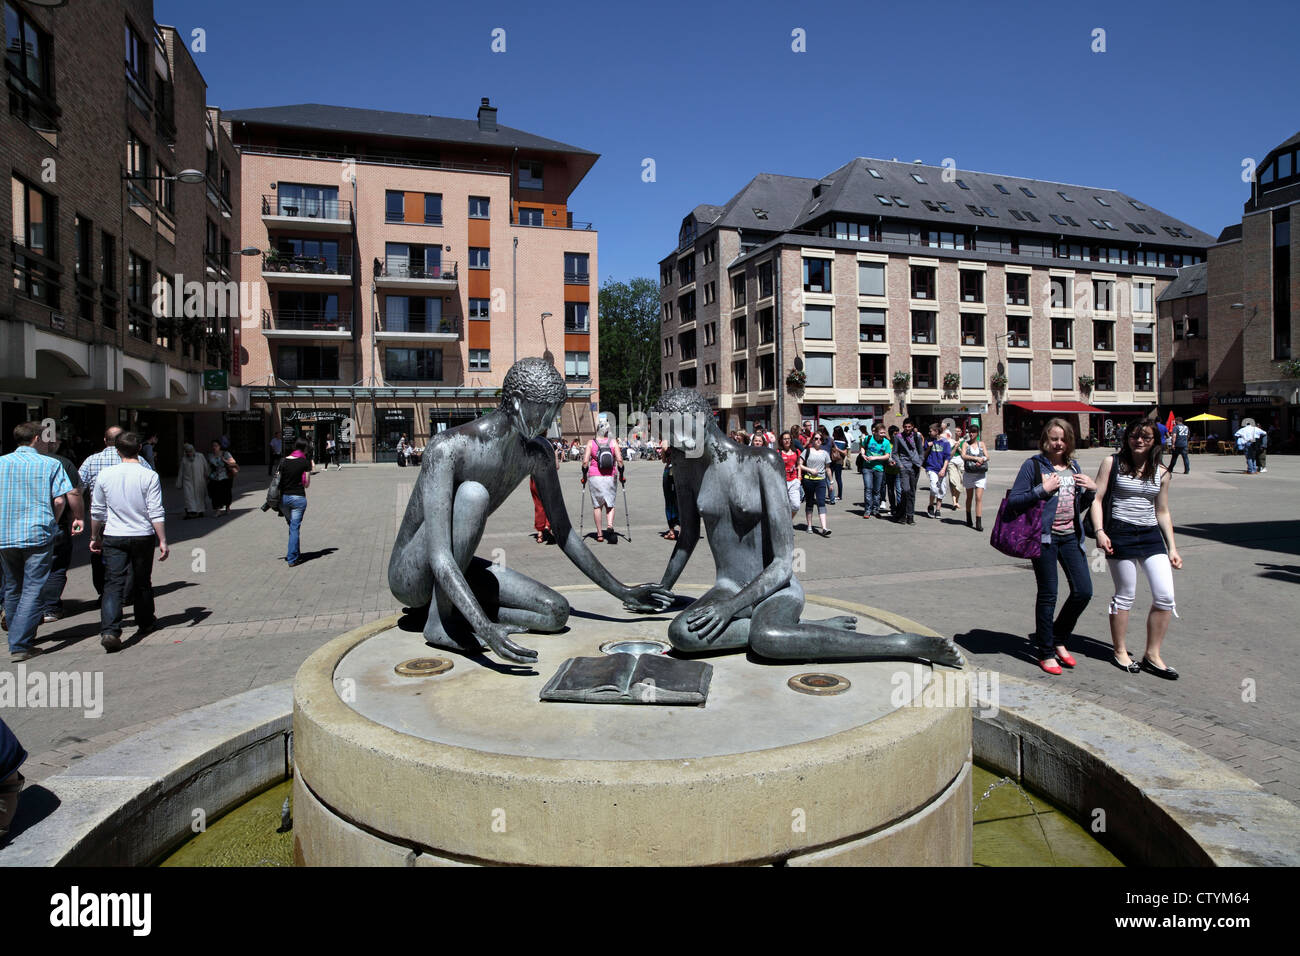 A sculpture in the Place de l'University in the centre of Louvain-La-Neuve, a Belgian new town with a traffic-free town centre. Stock Photo